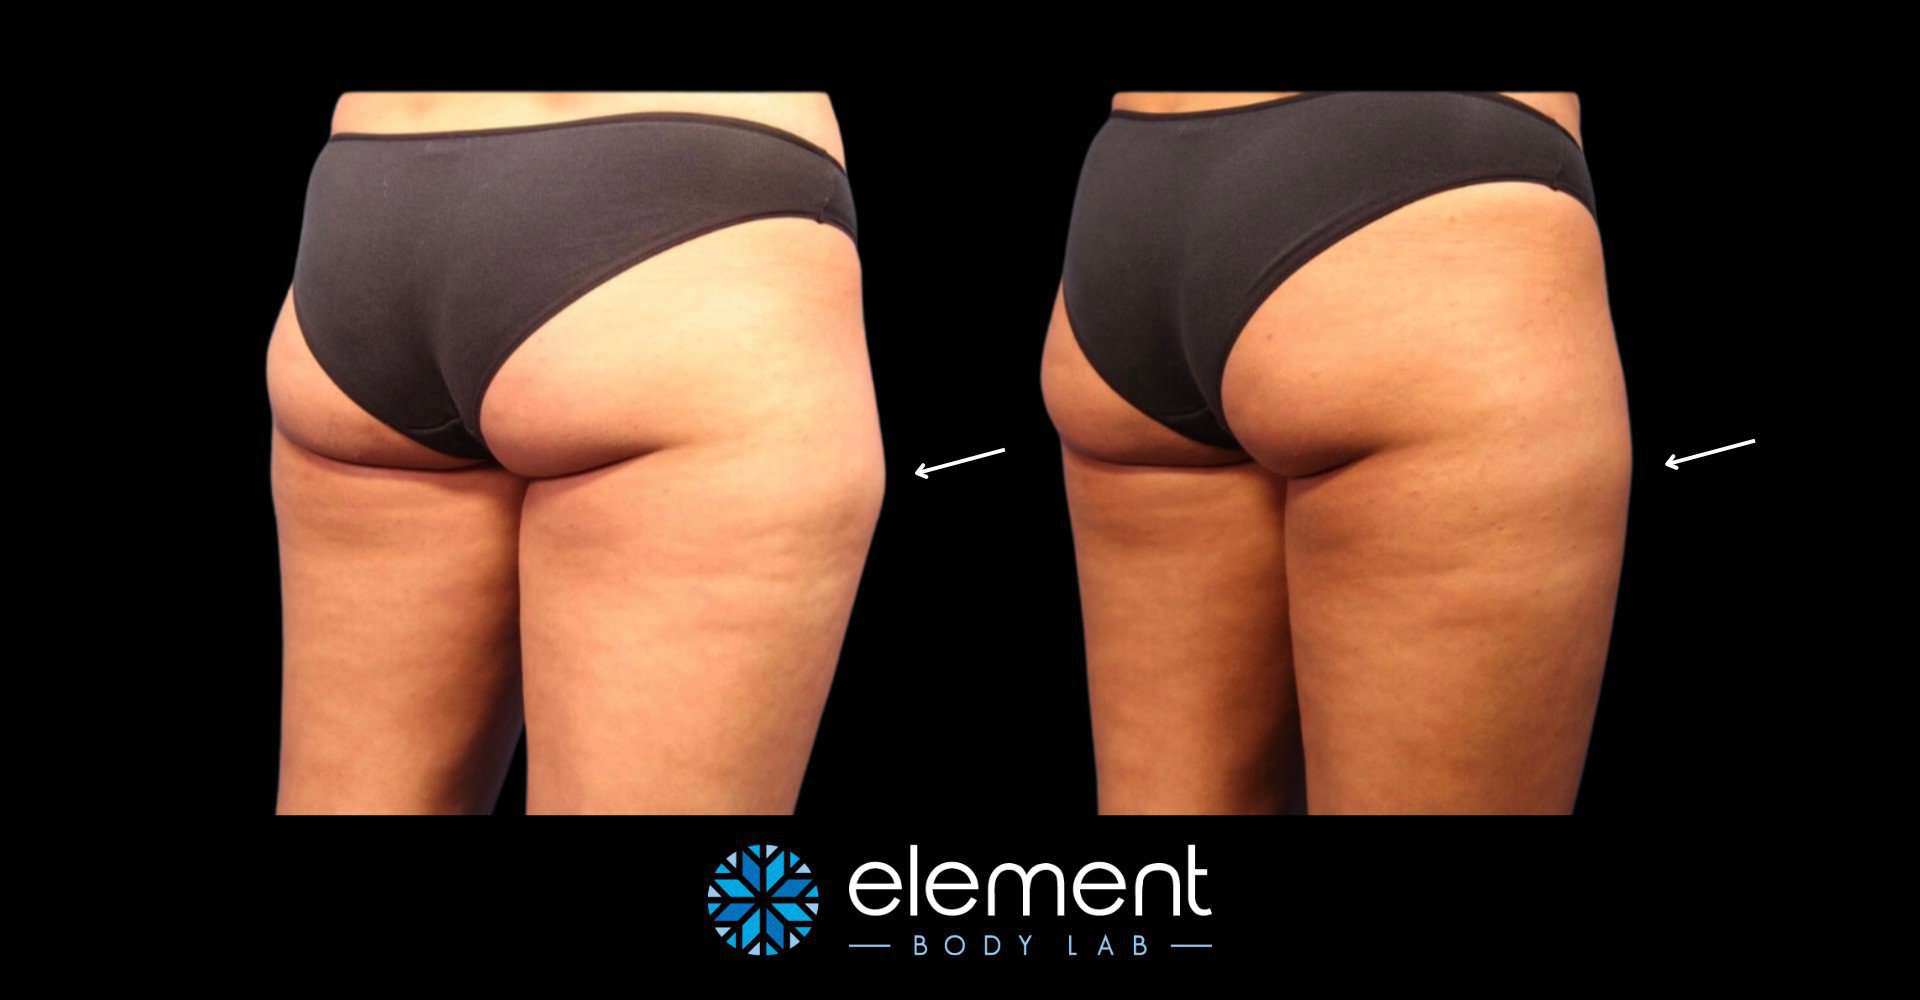 CoolSculpting Before And After Gallery - Element Body Lab